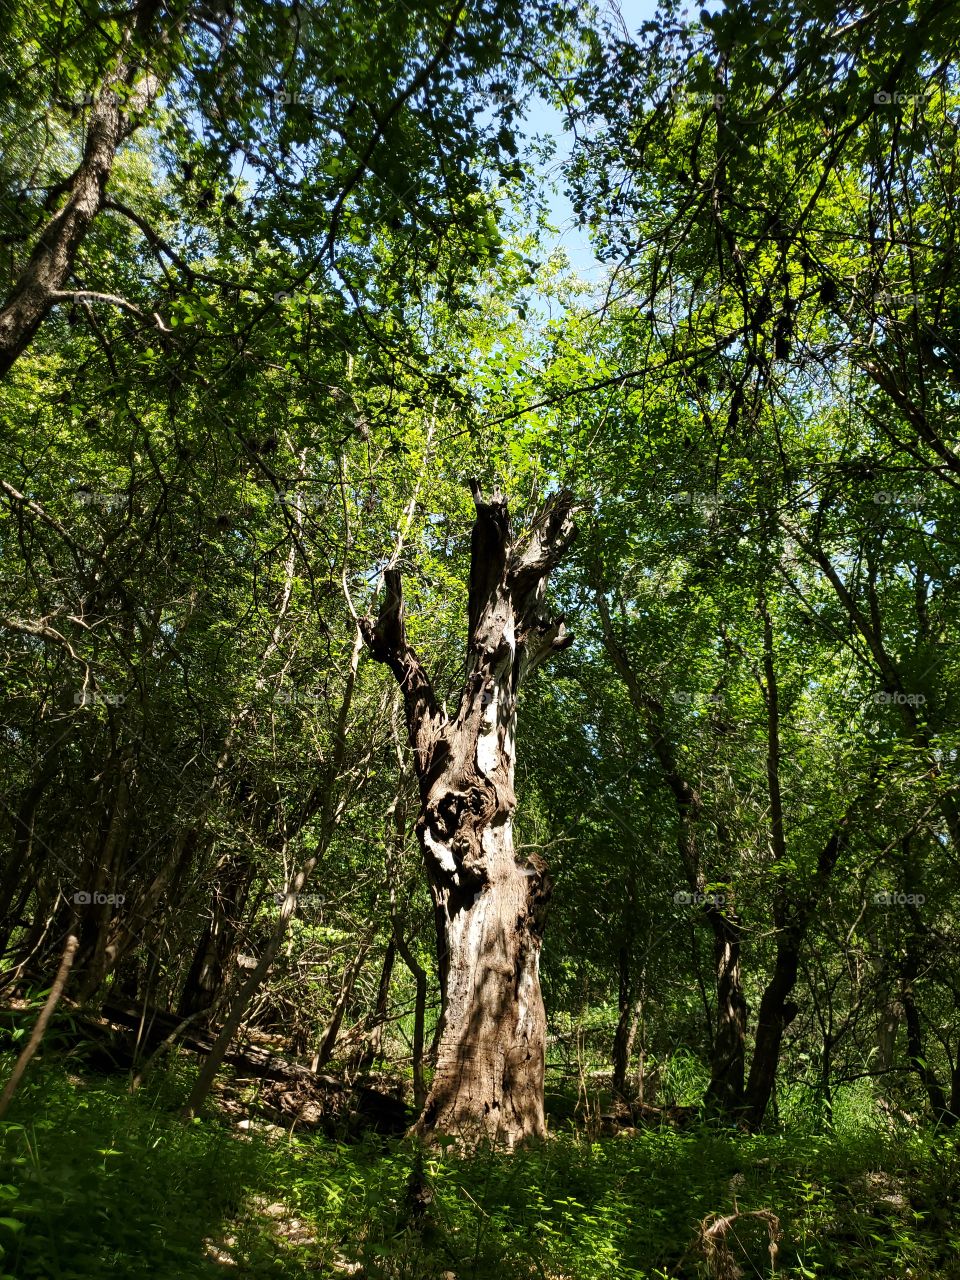 The dead tree  creates an opening in the forest canopy where the bright summer sunlight shines through and illuminates it, thus creating an intriguing display in nature.